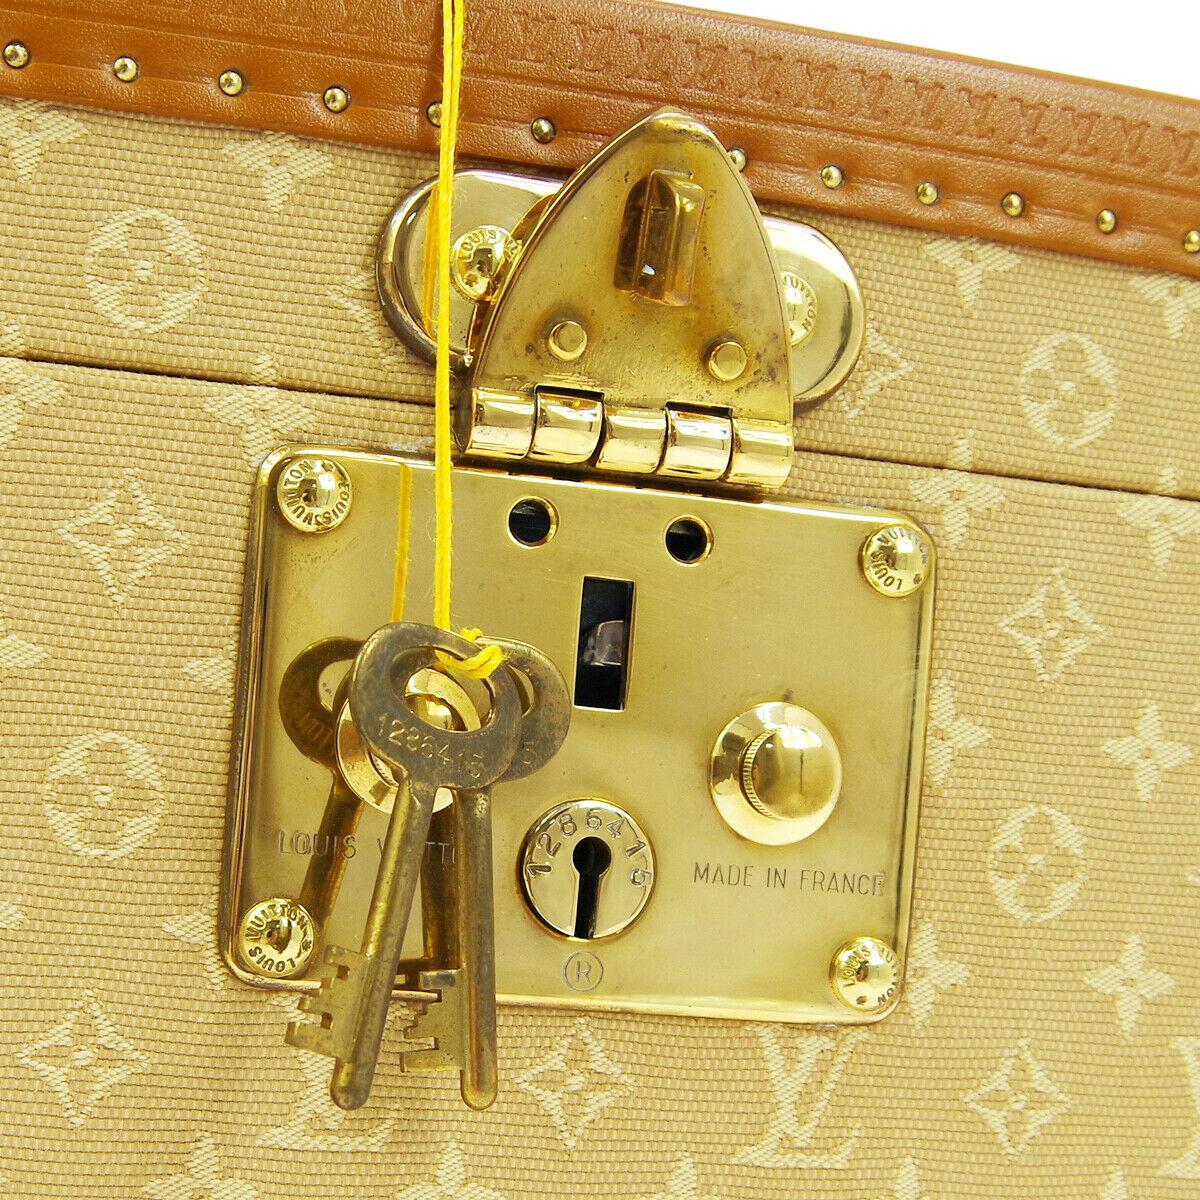 Louis Vuitton Limited Edition Tan Monogram Leather Travel Vanity Top Handle Storage Box Trunk

Fabric
Leather
Silver tone hardware
Flip lock closure
Velvet lining
Date code present
Made in France
Handle drop 1.5